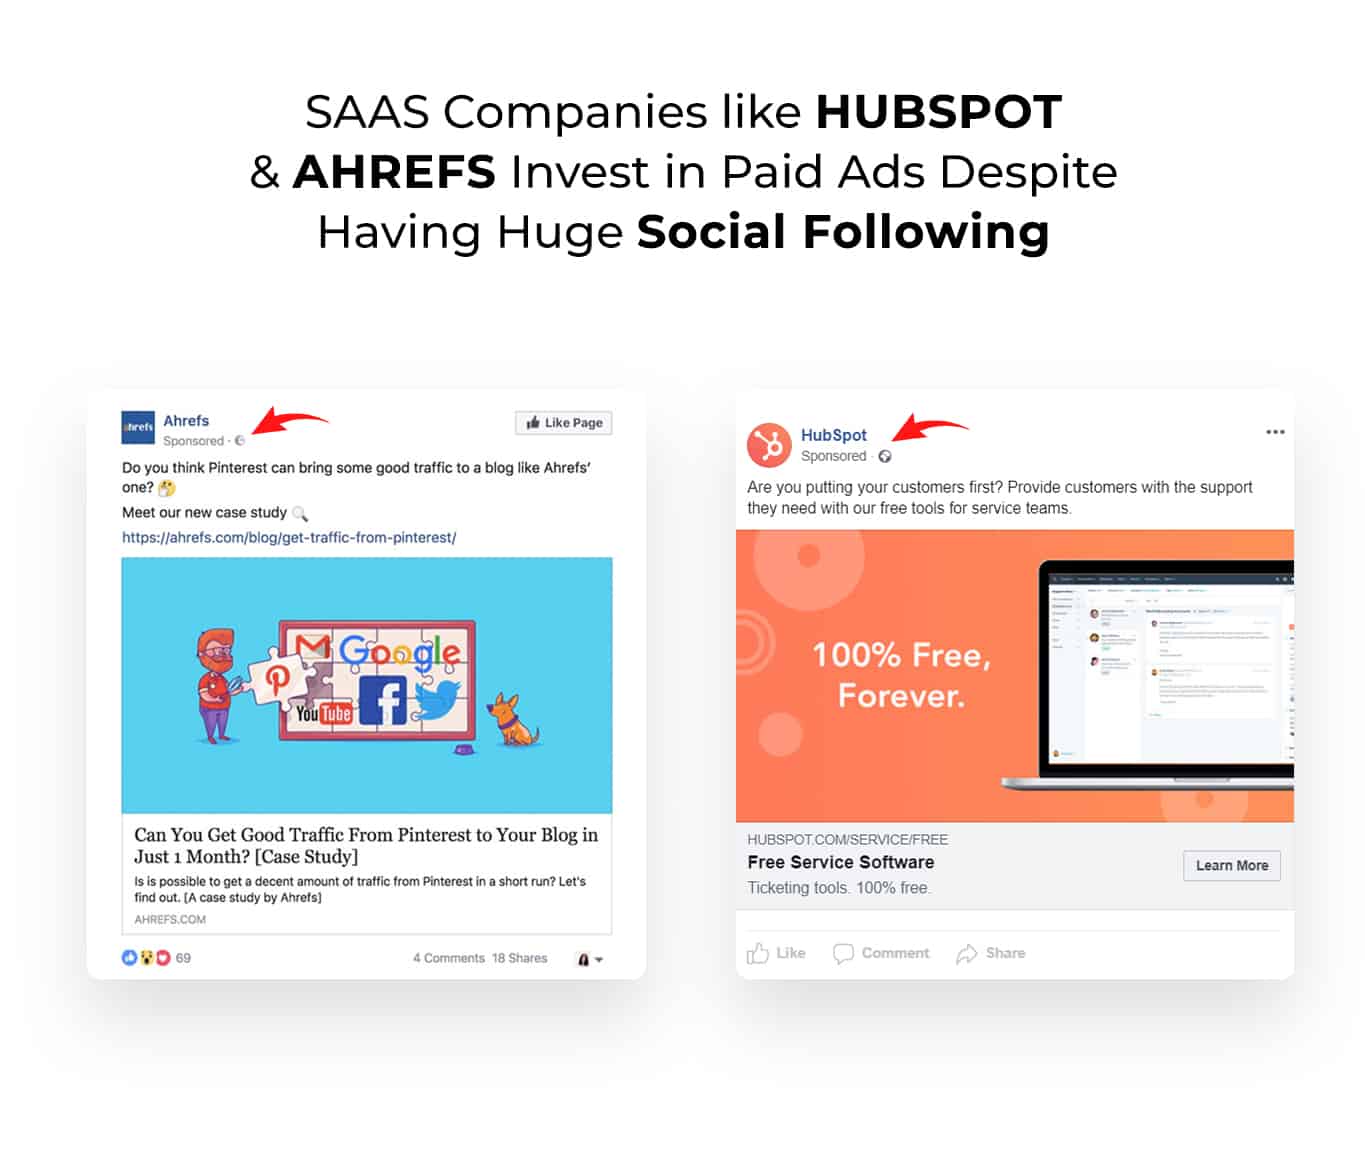 Hubspot & Ahrefs Investing in Paid Ads on Facebook